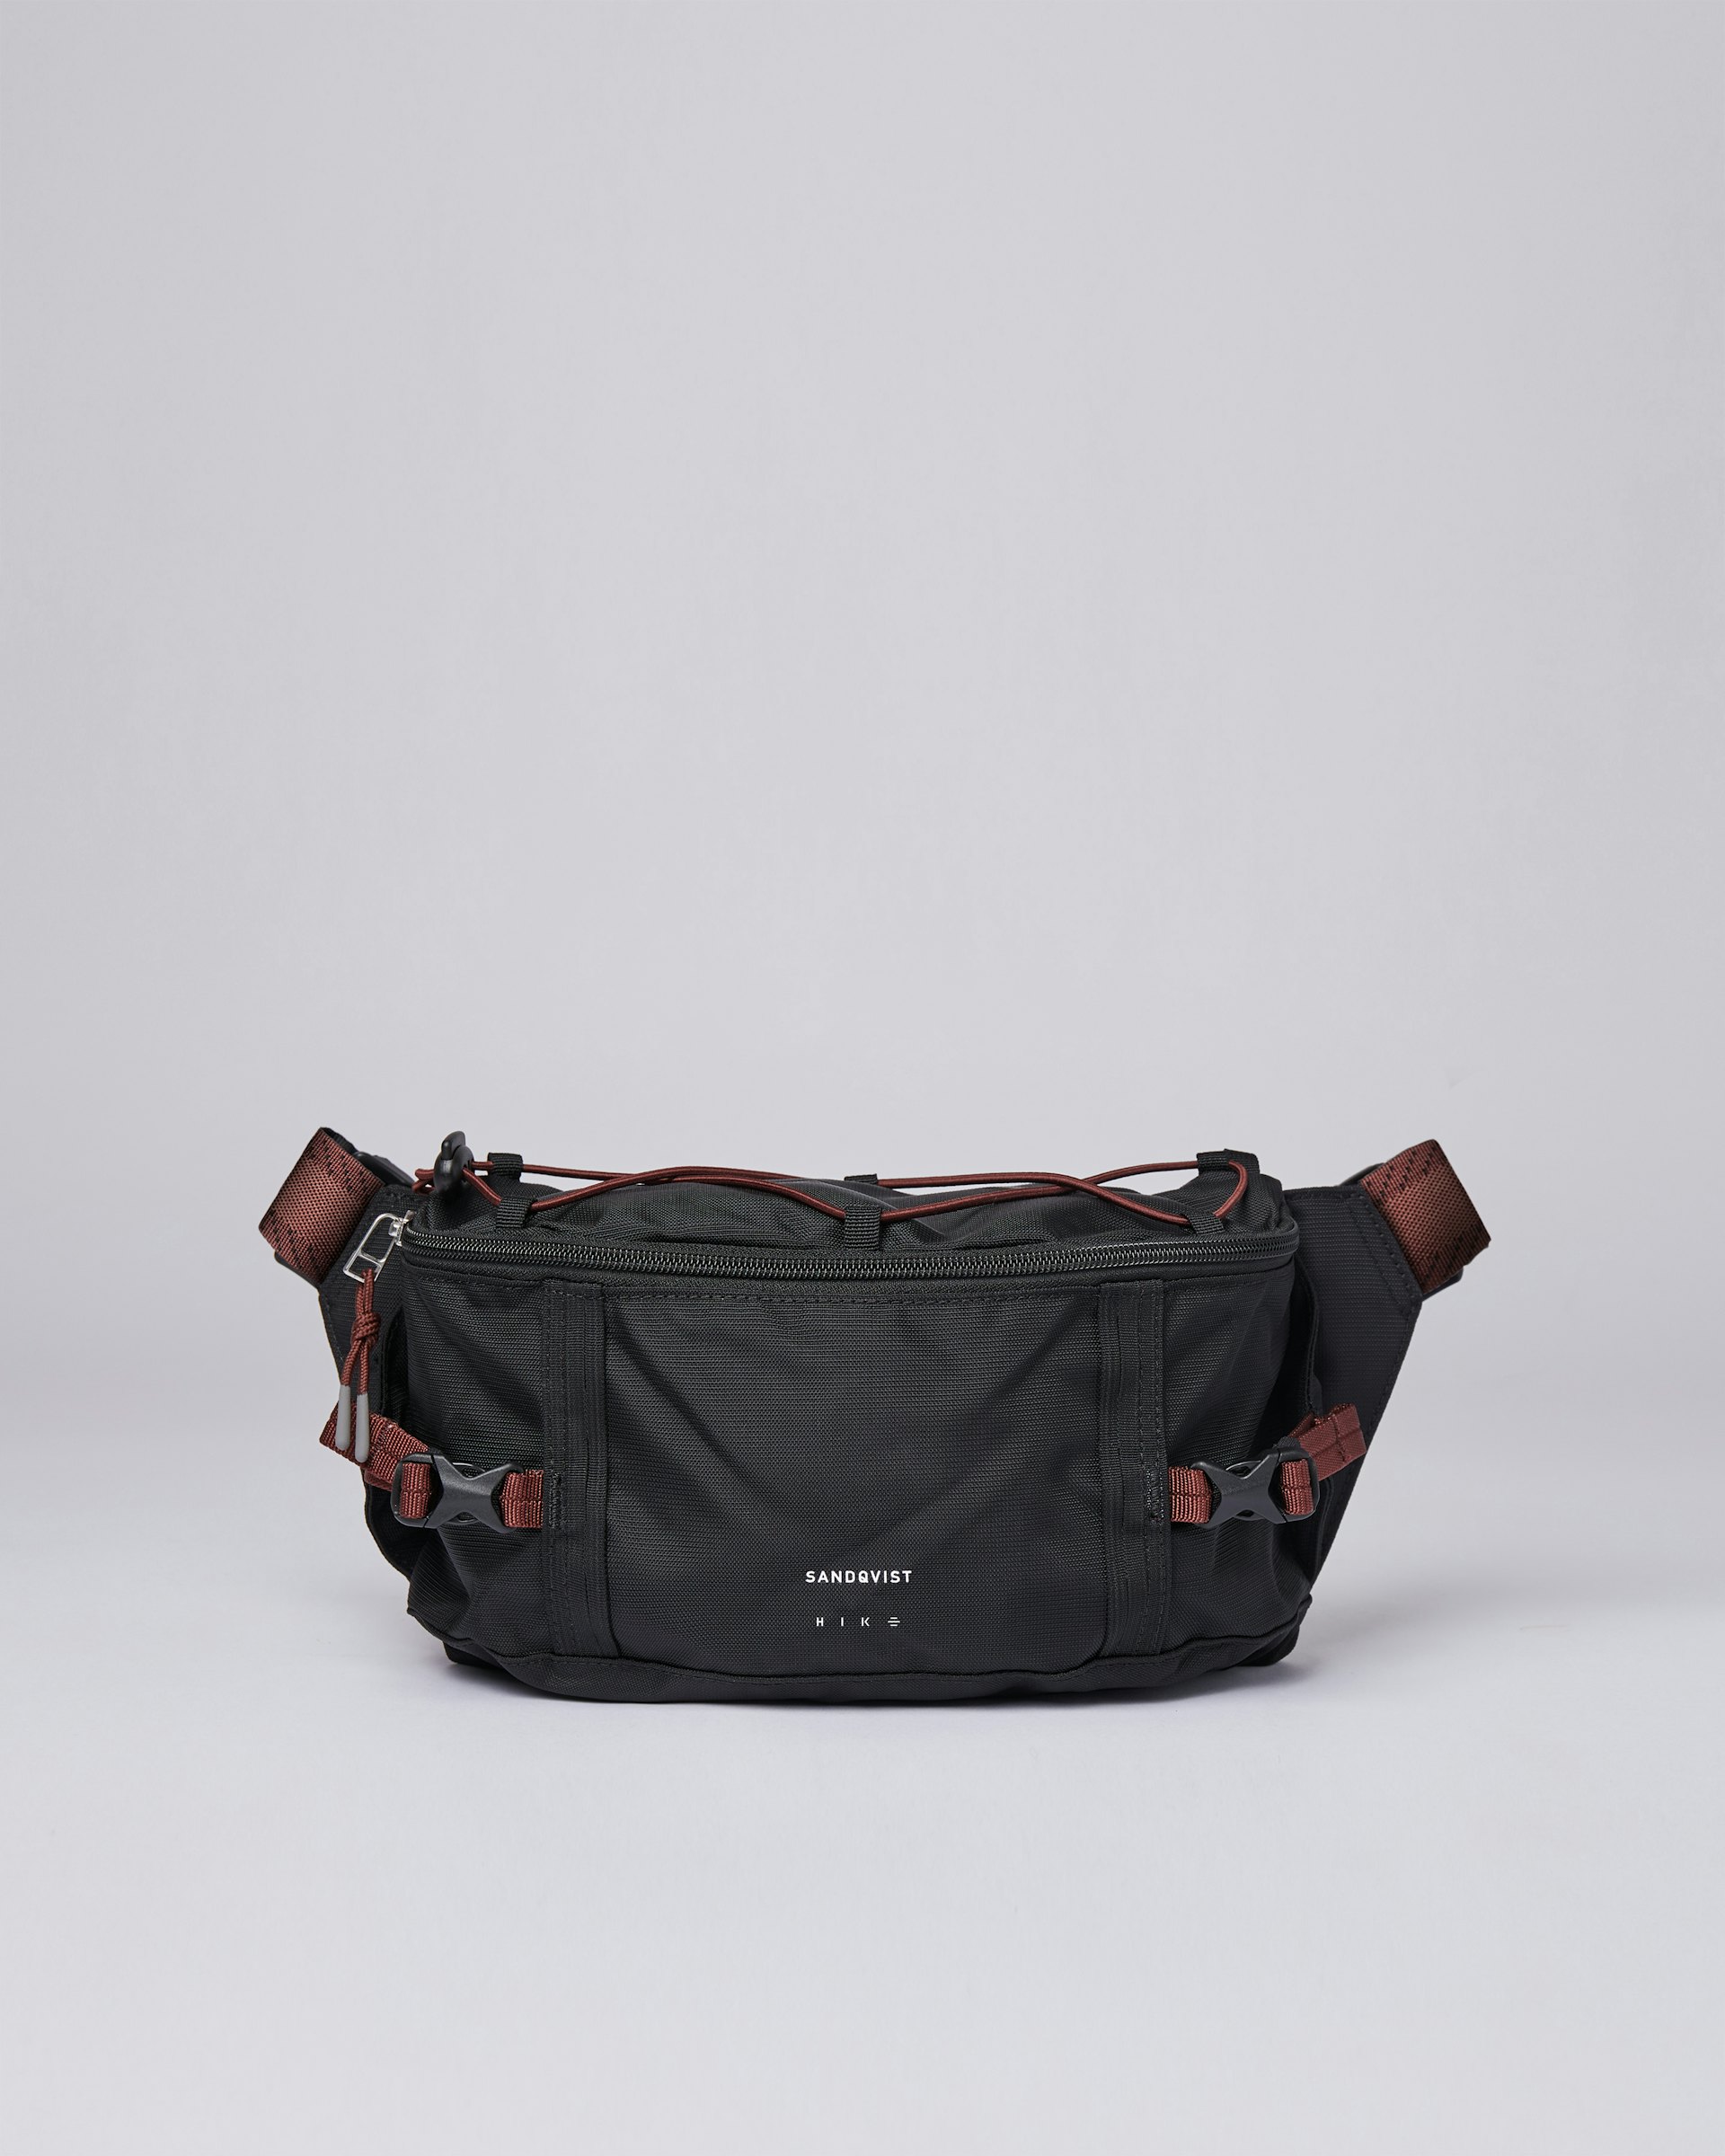 Allterrain Hike belongs to the category Bum bags and is in color black